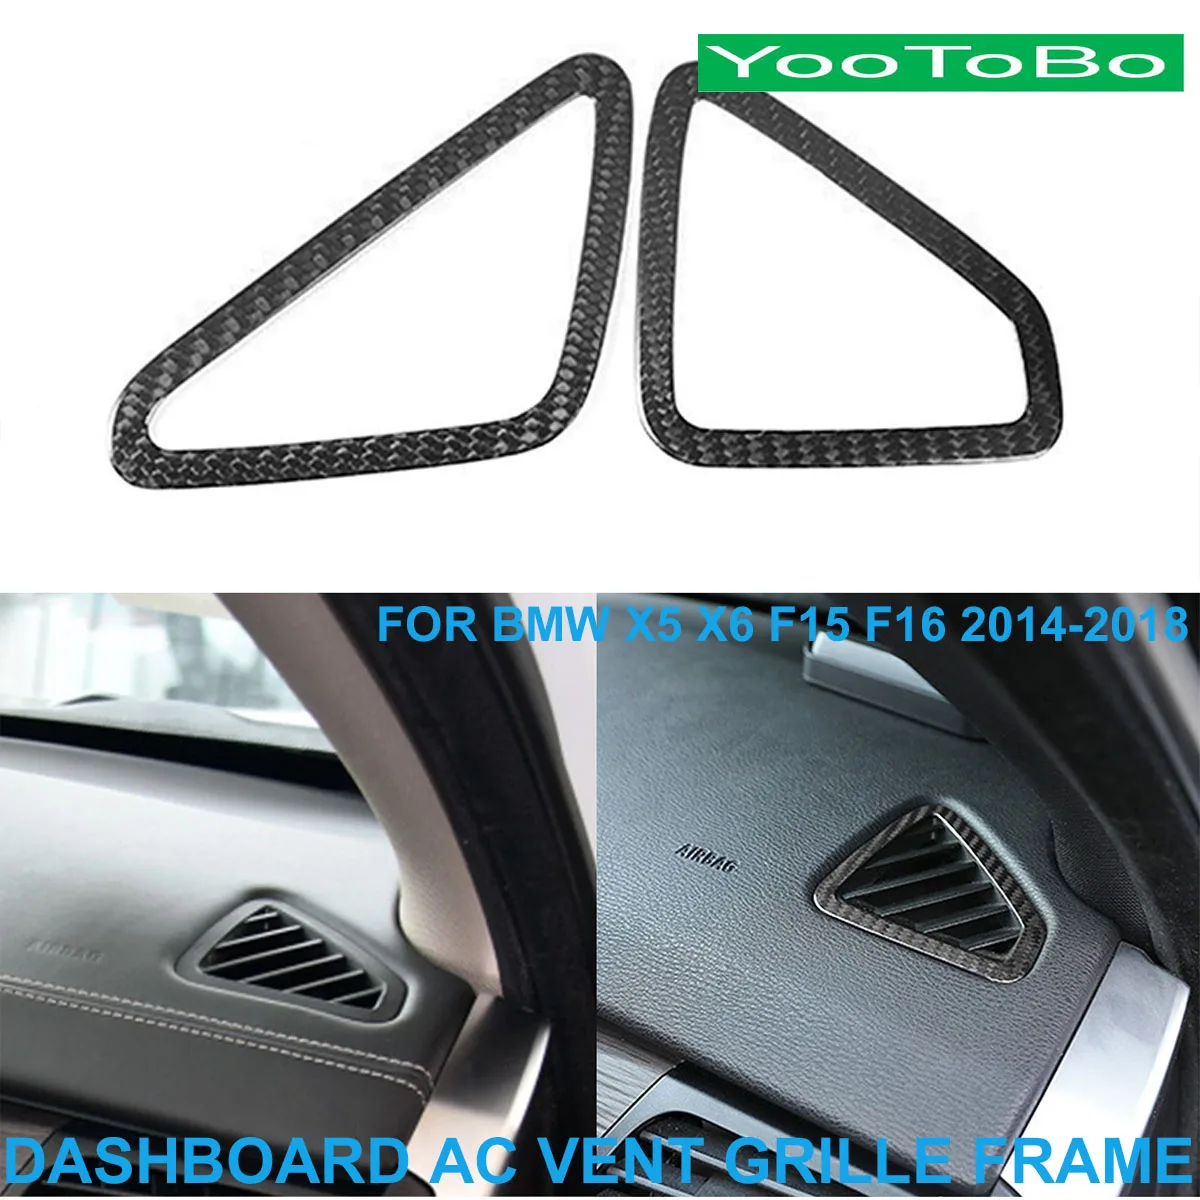 

LHD RHD Car Styling Real Carbon Fiber Dashboard AC Air Conditioner Vent Grille Frame Cover Trim For BMW X5 X6 F15 F16 2014-2018